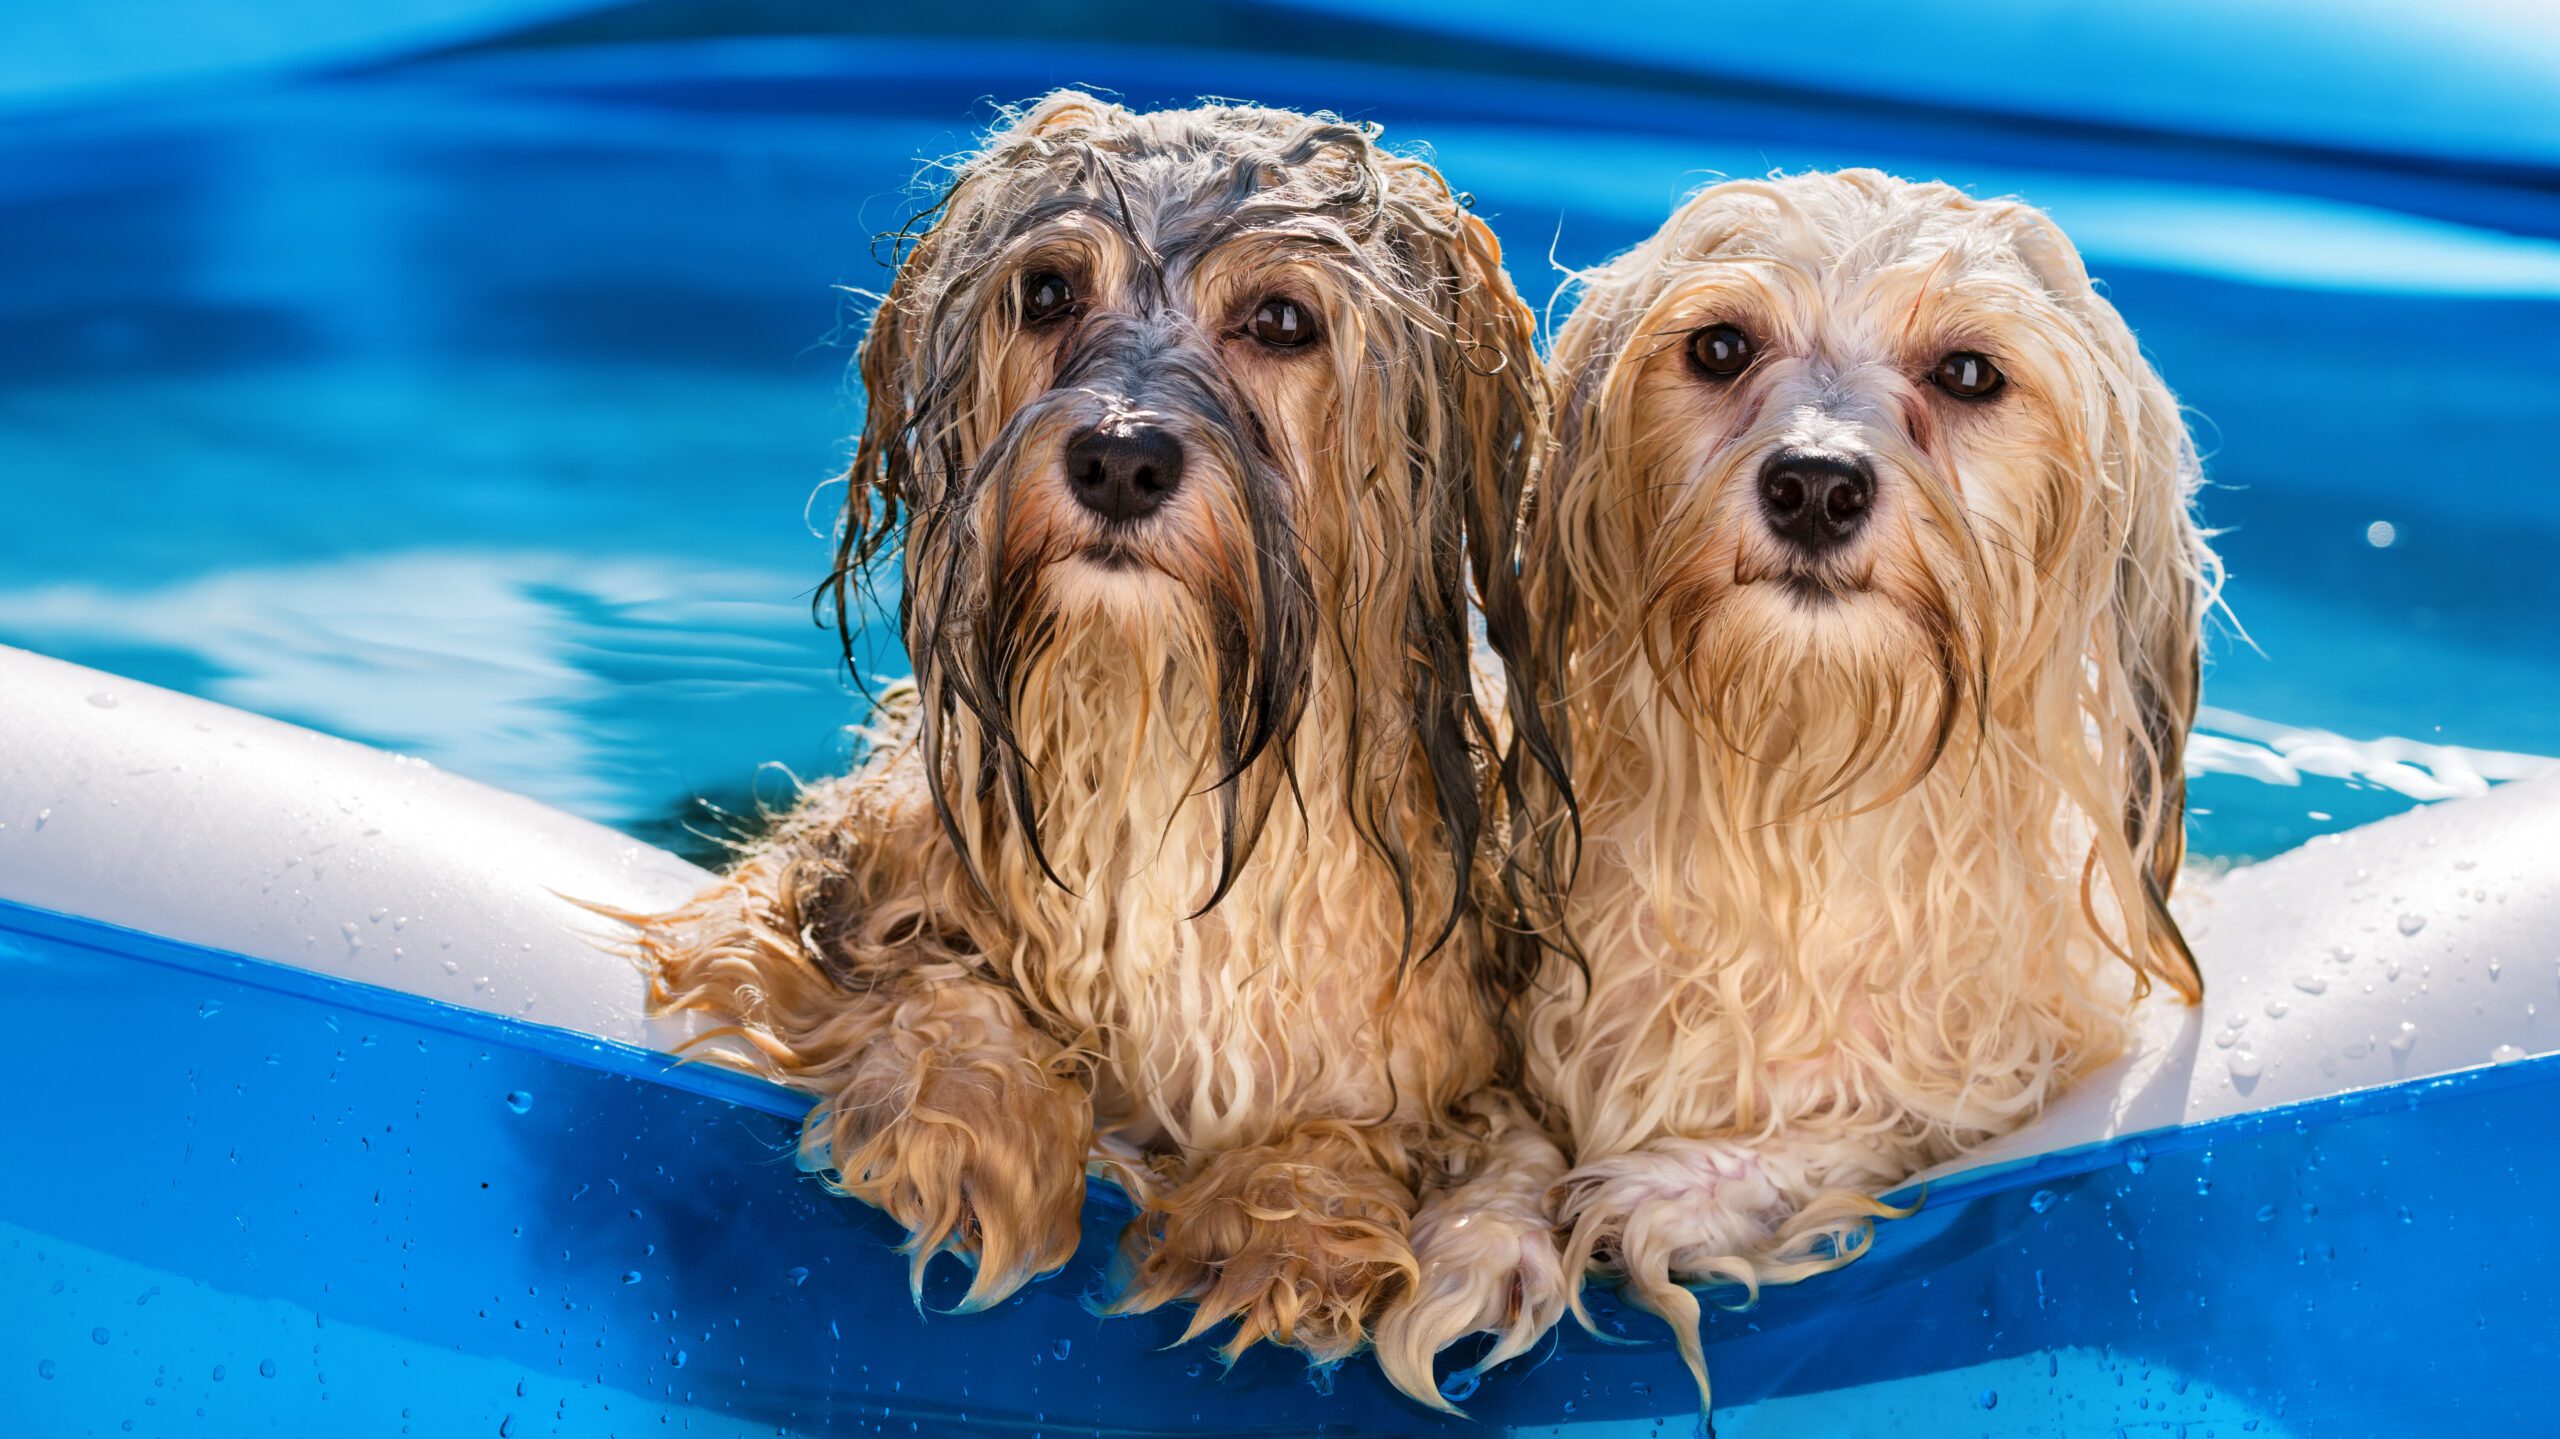 Swimming pools can be safe if proper precautions and supervision are in place, but not all dogs are natural swimmers!